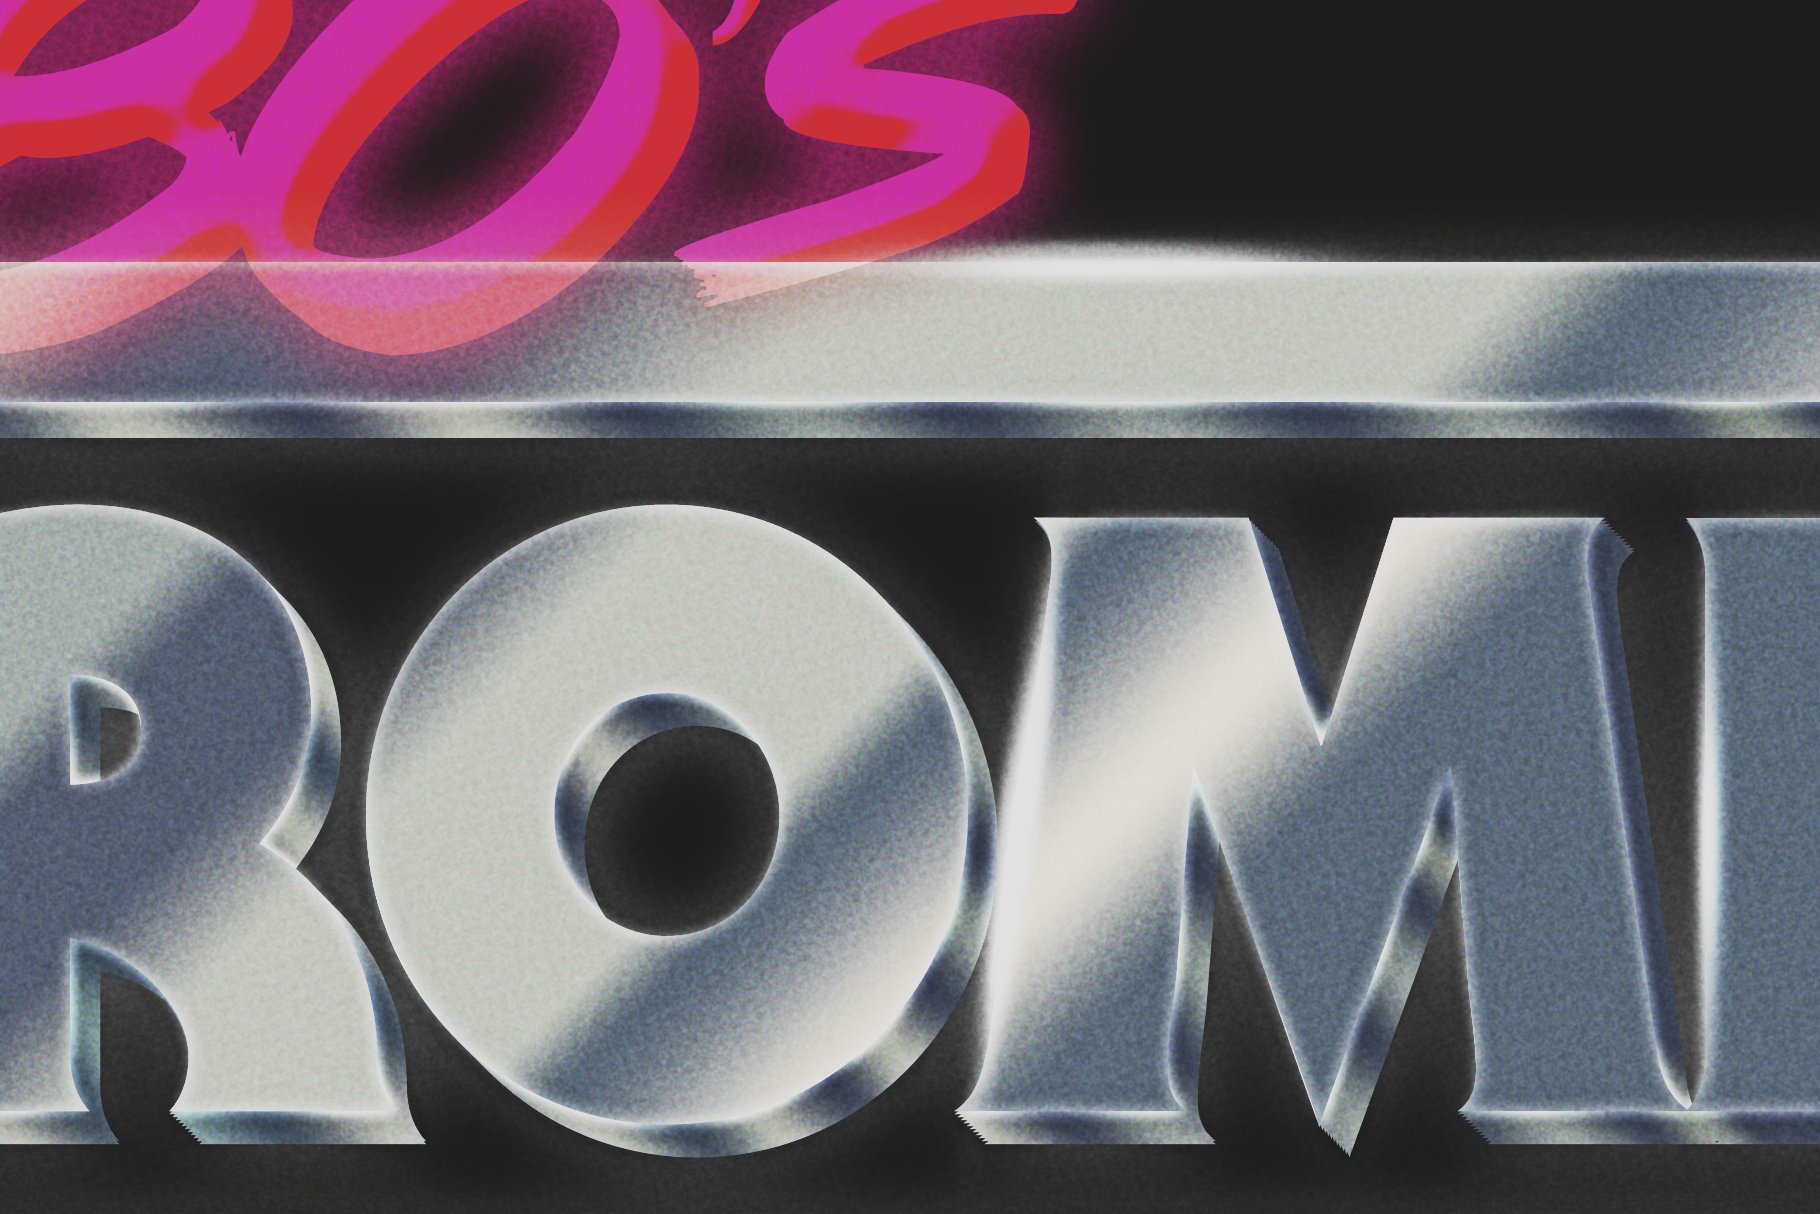 80's Chrome Photoshop Text Effectpreview image.